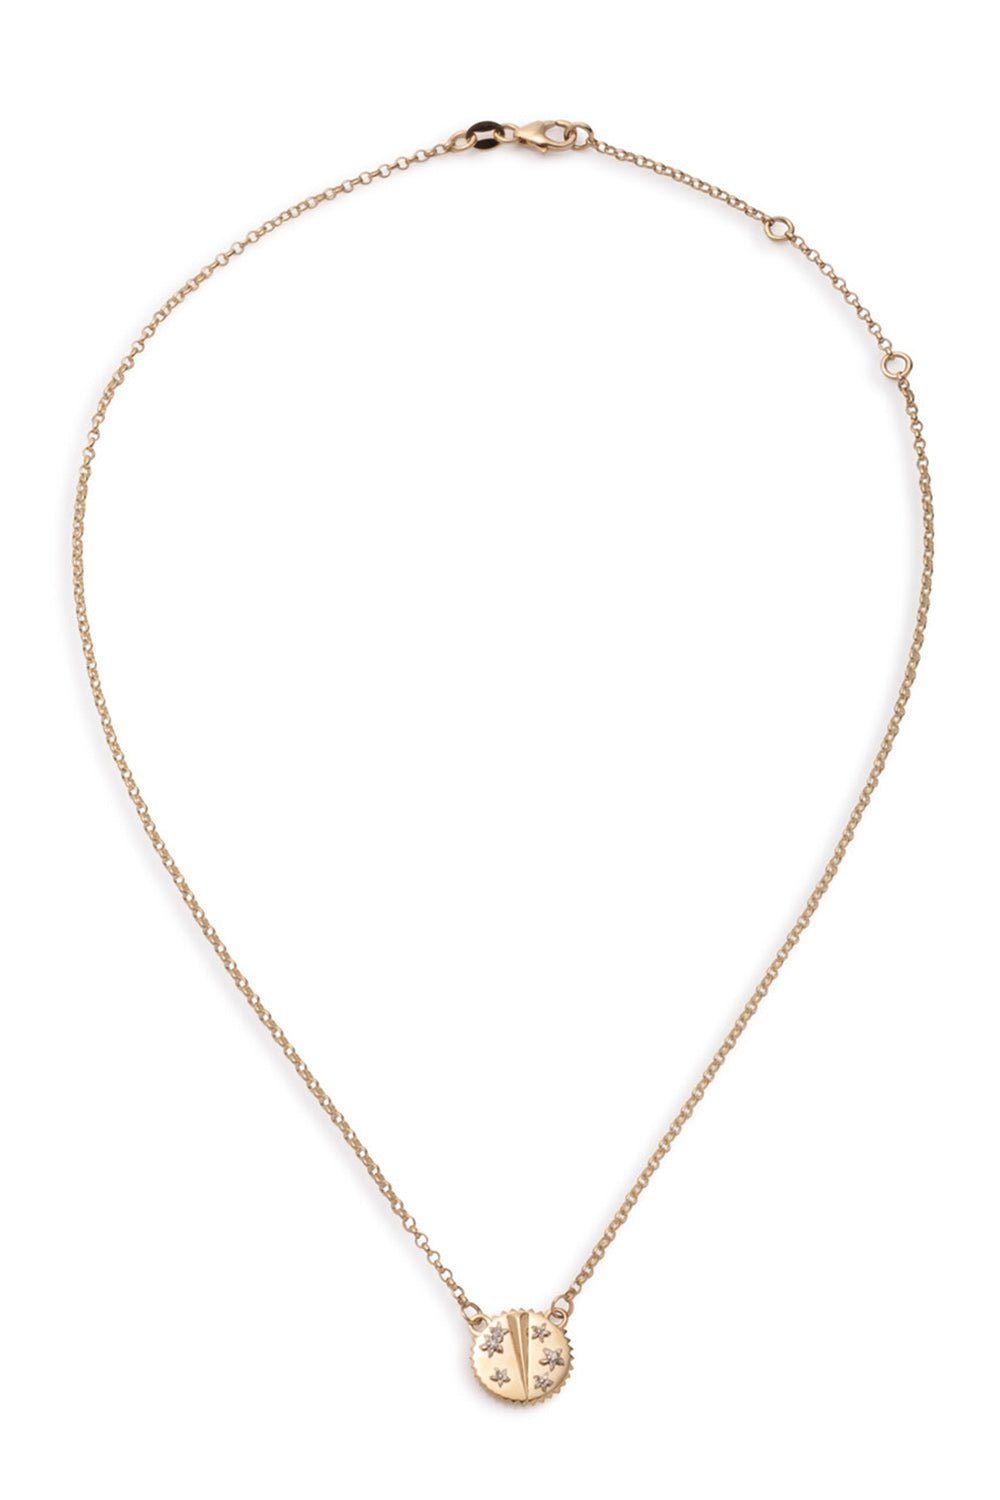 FOUNDRAE-Resilience - Mini Stationary Necklace-YELLOW GOLD